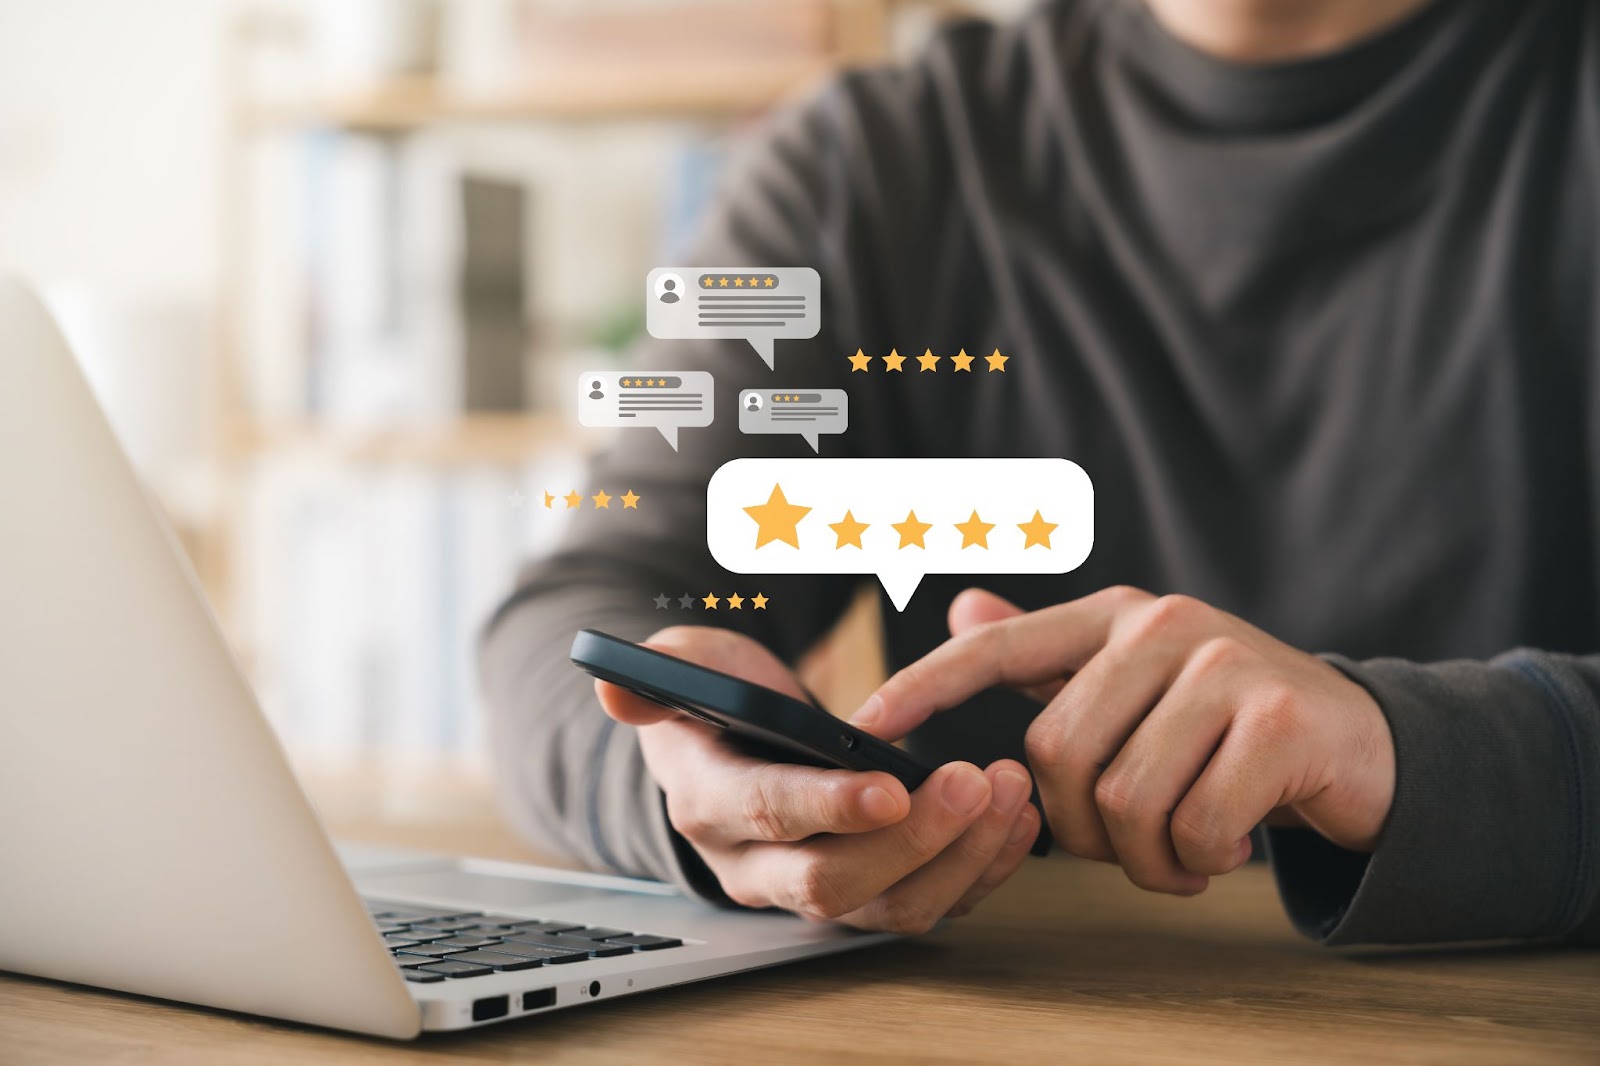 How to choose a roofer - evaluate customer reviews and testimonials